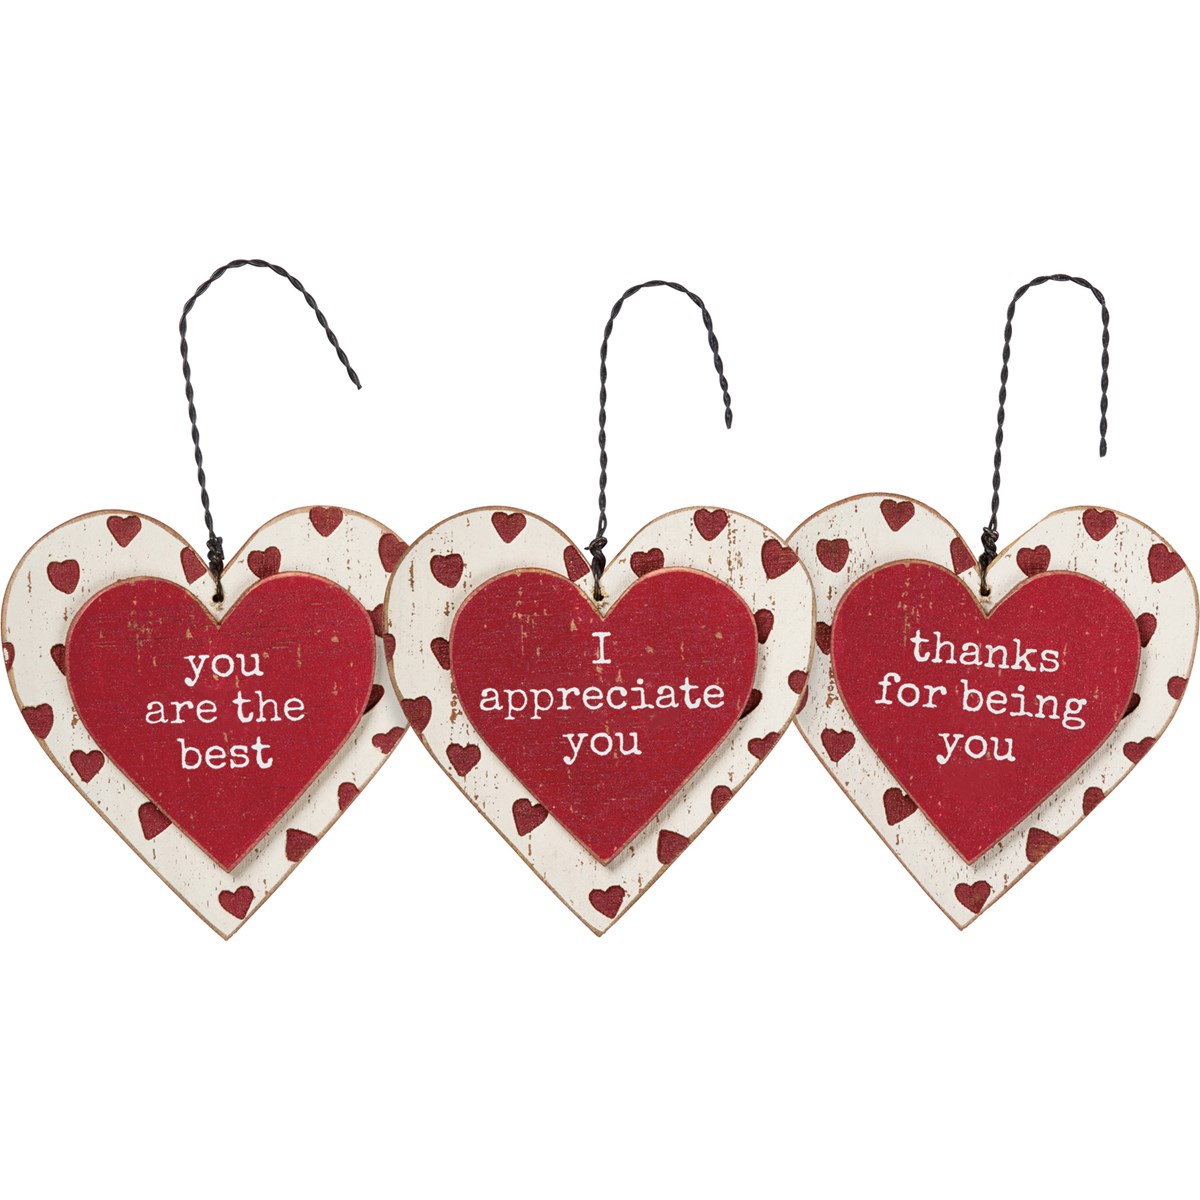 Ornament Set - You Are The Best - 3" x 3" x 0.25" - Wood, Wire